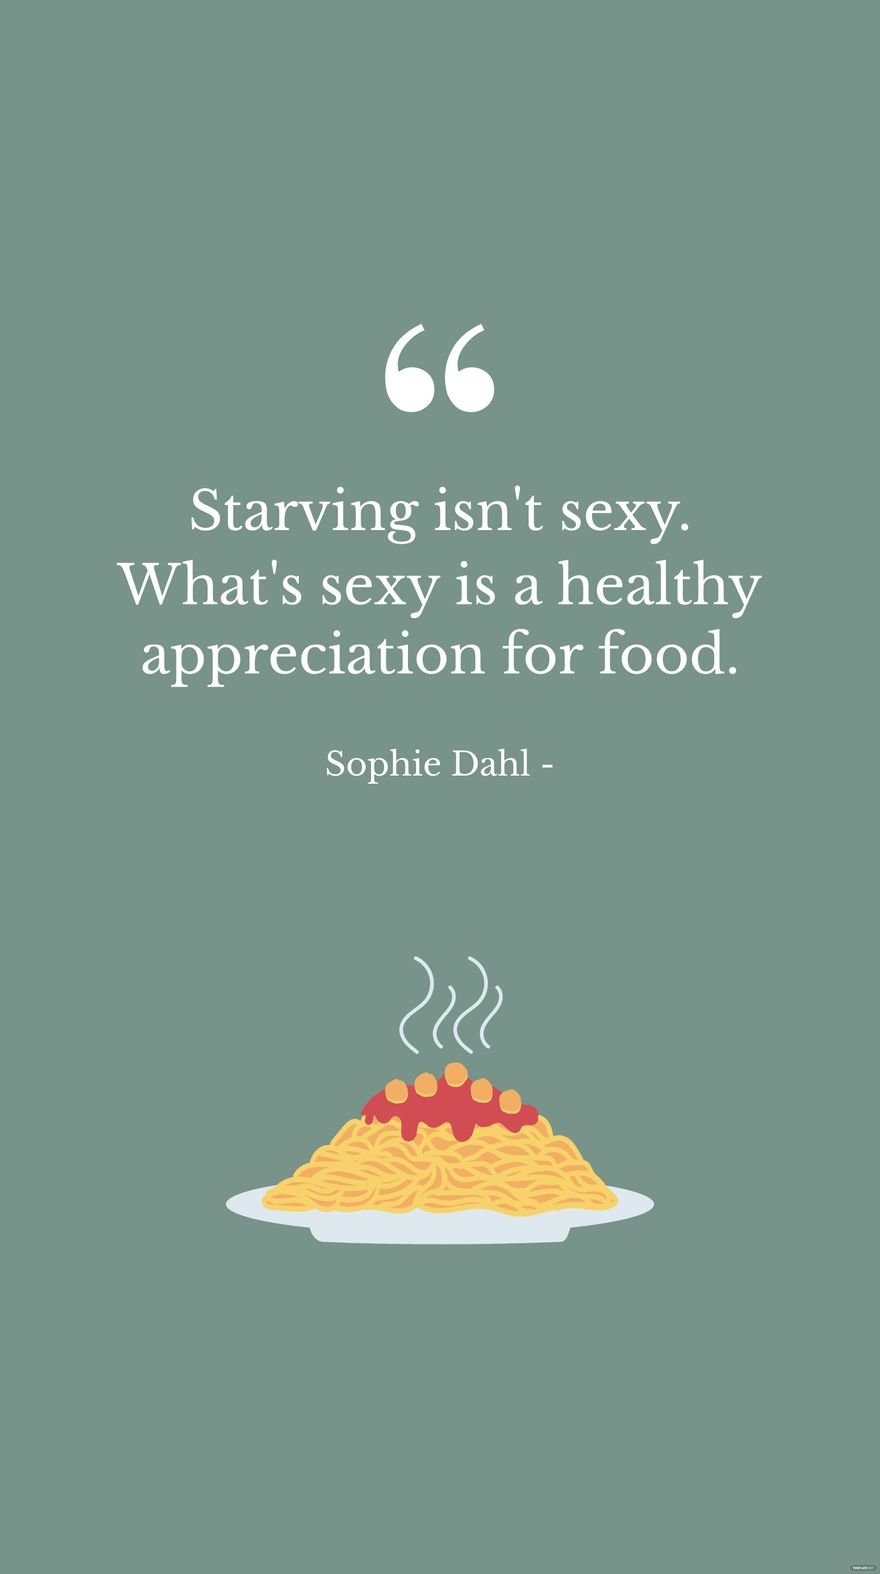 Sophie Dahl - Starving isn't sexy. What's sexy is a healthy appreciation for food.